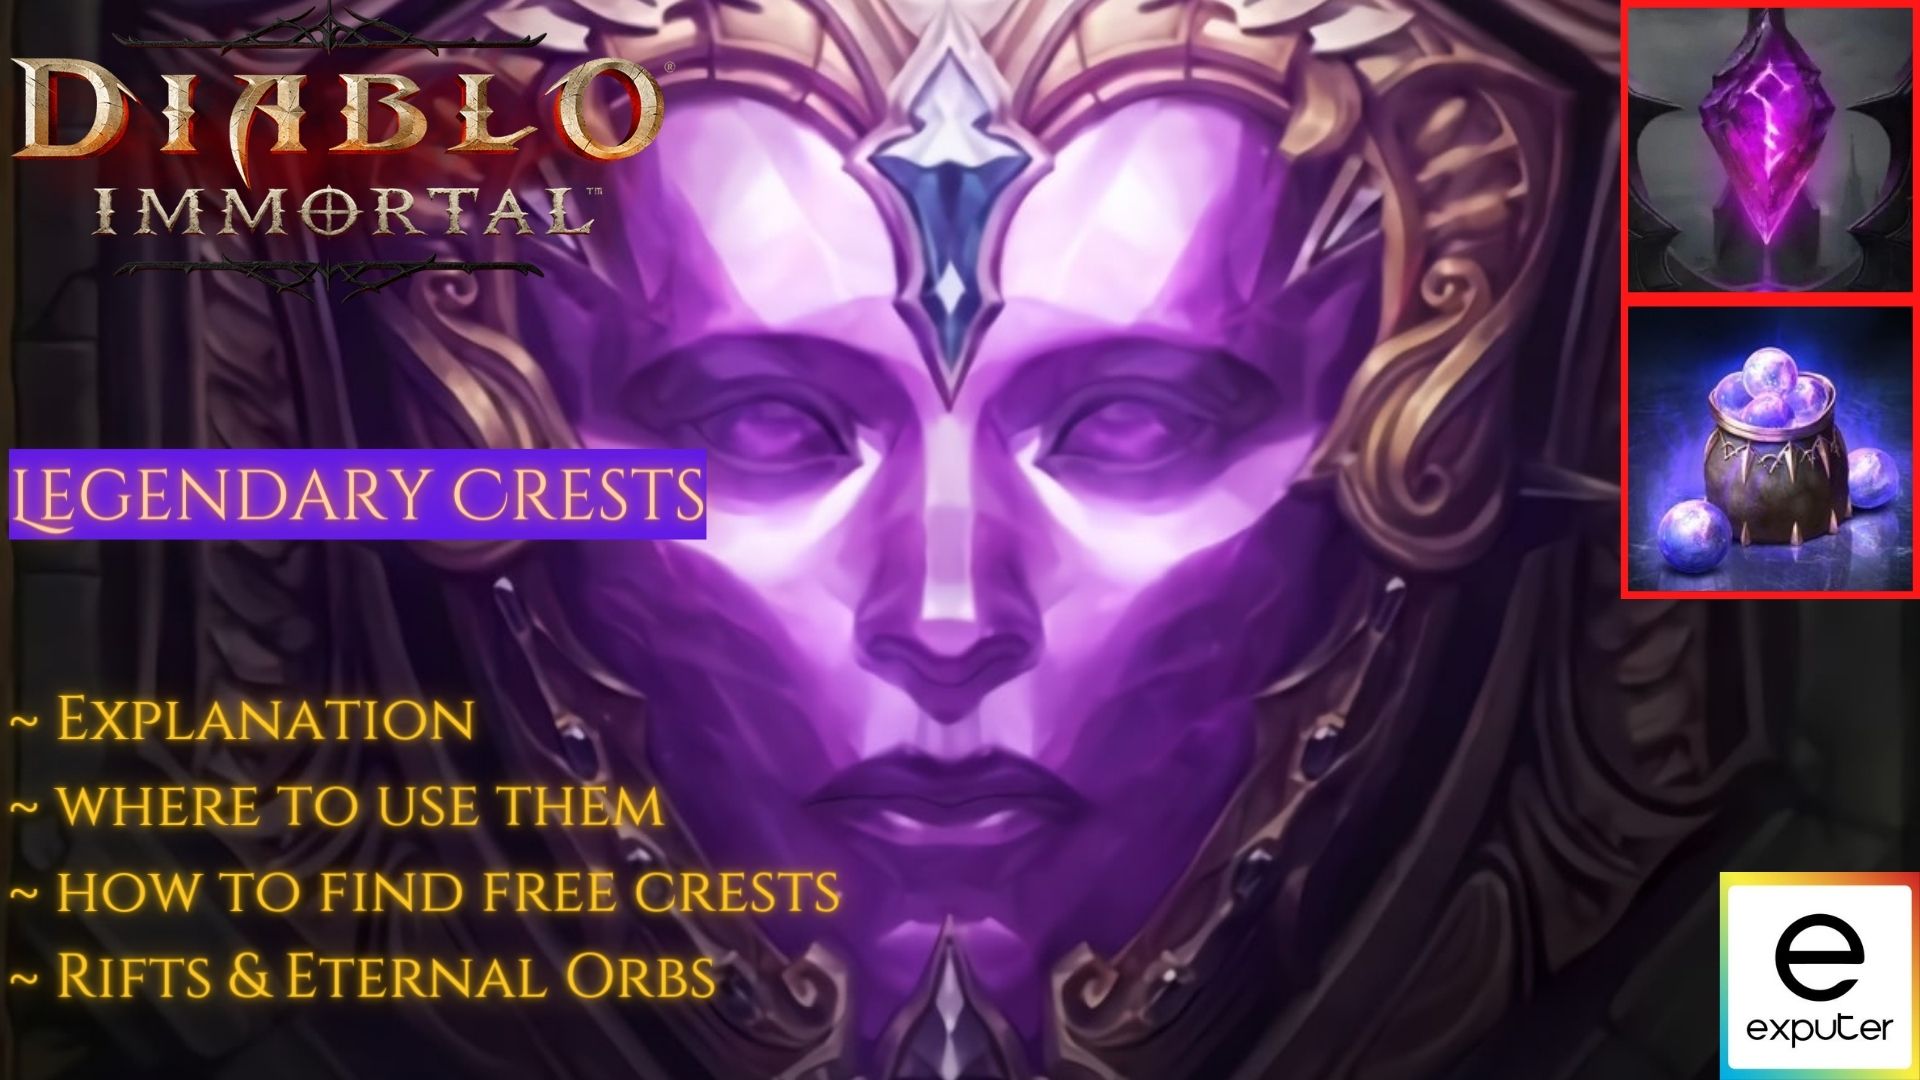 Diablo Immortal Legendary Crests: How To Find & Use